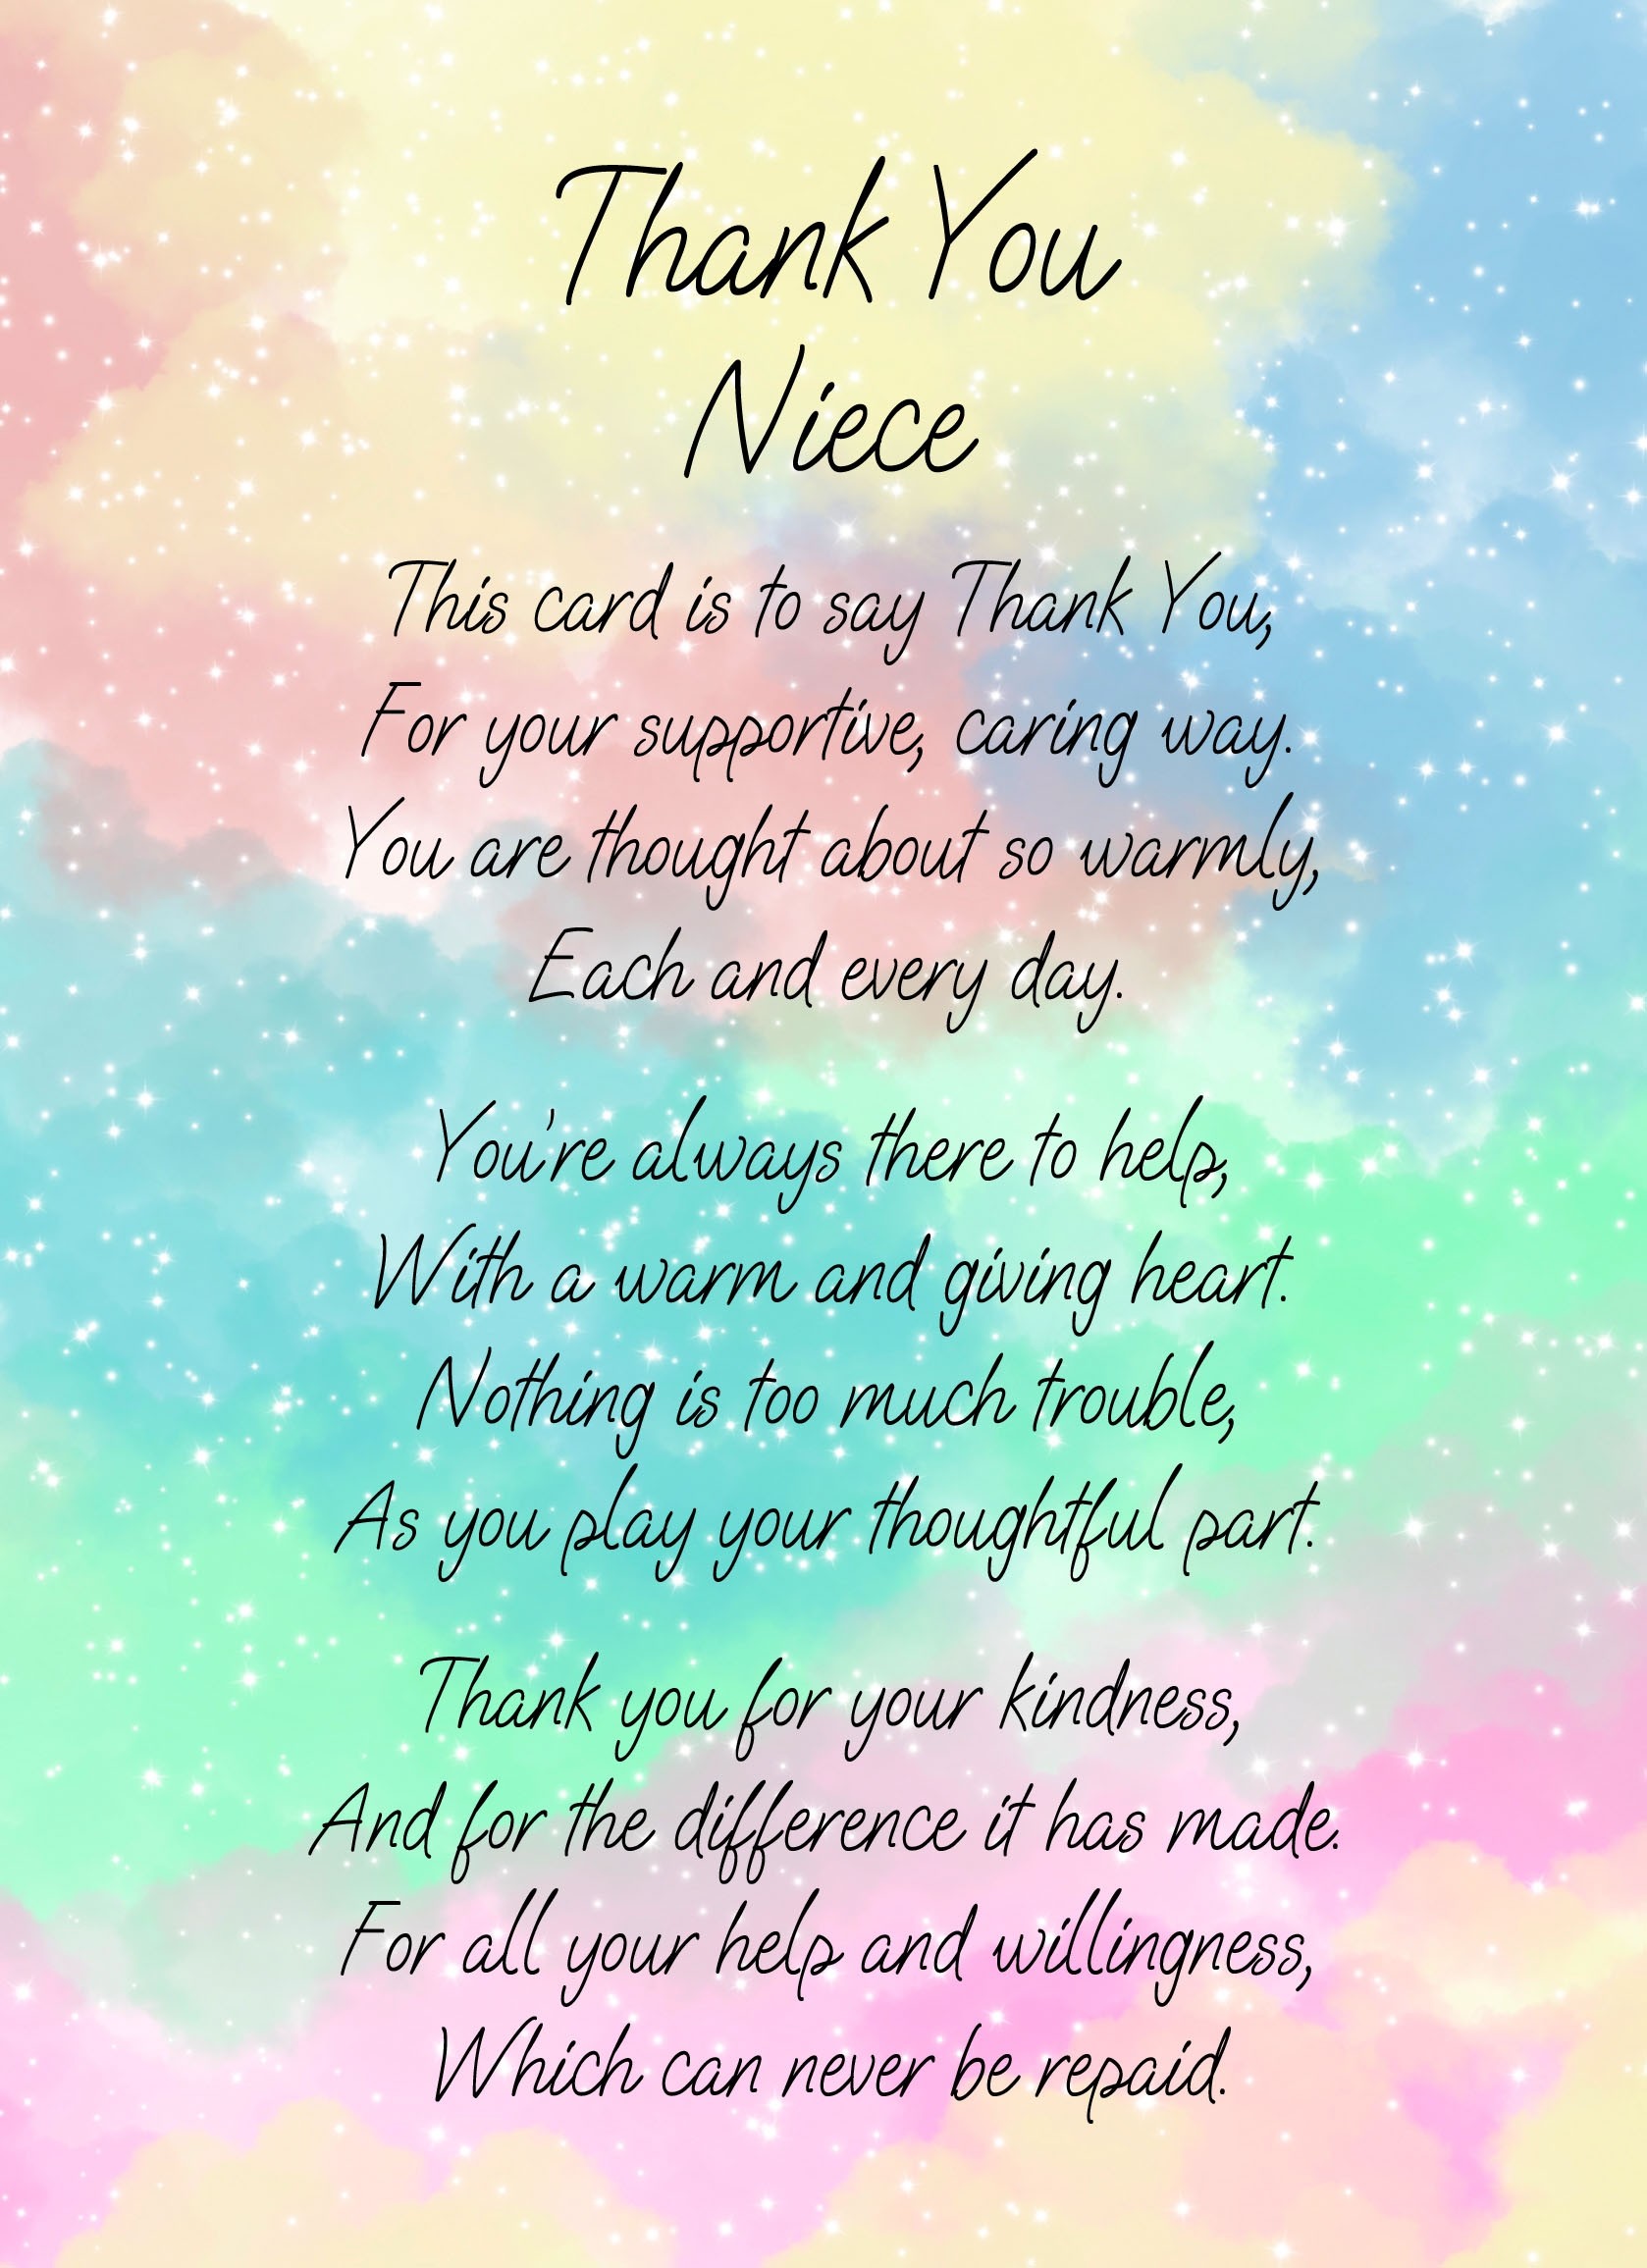 Thank You Poem Verse Card For Niece